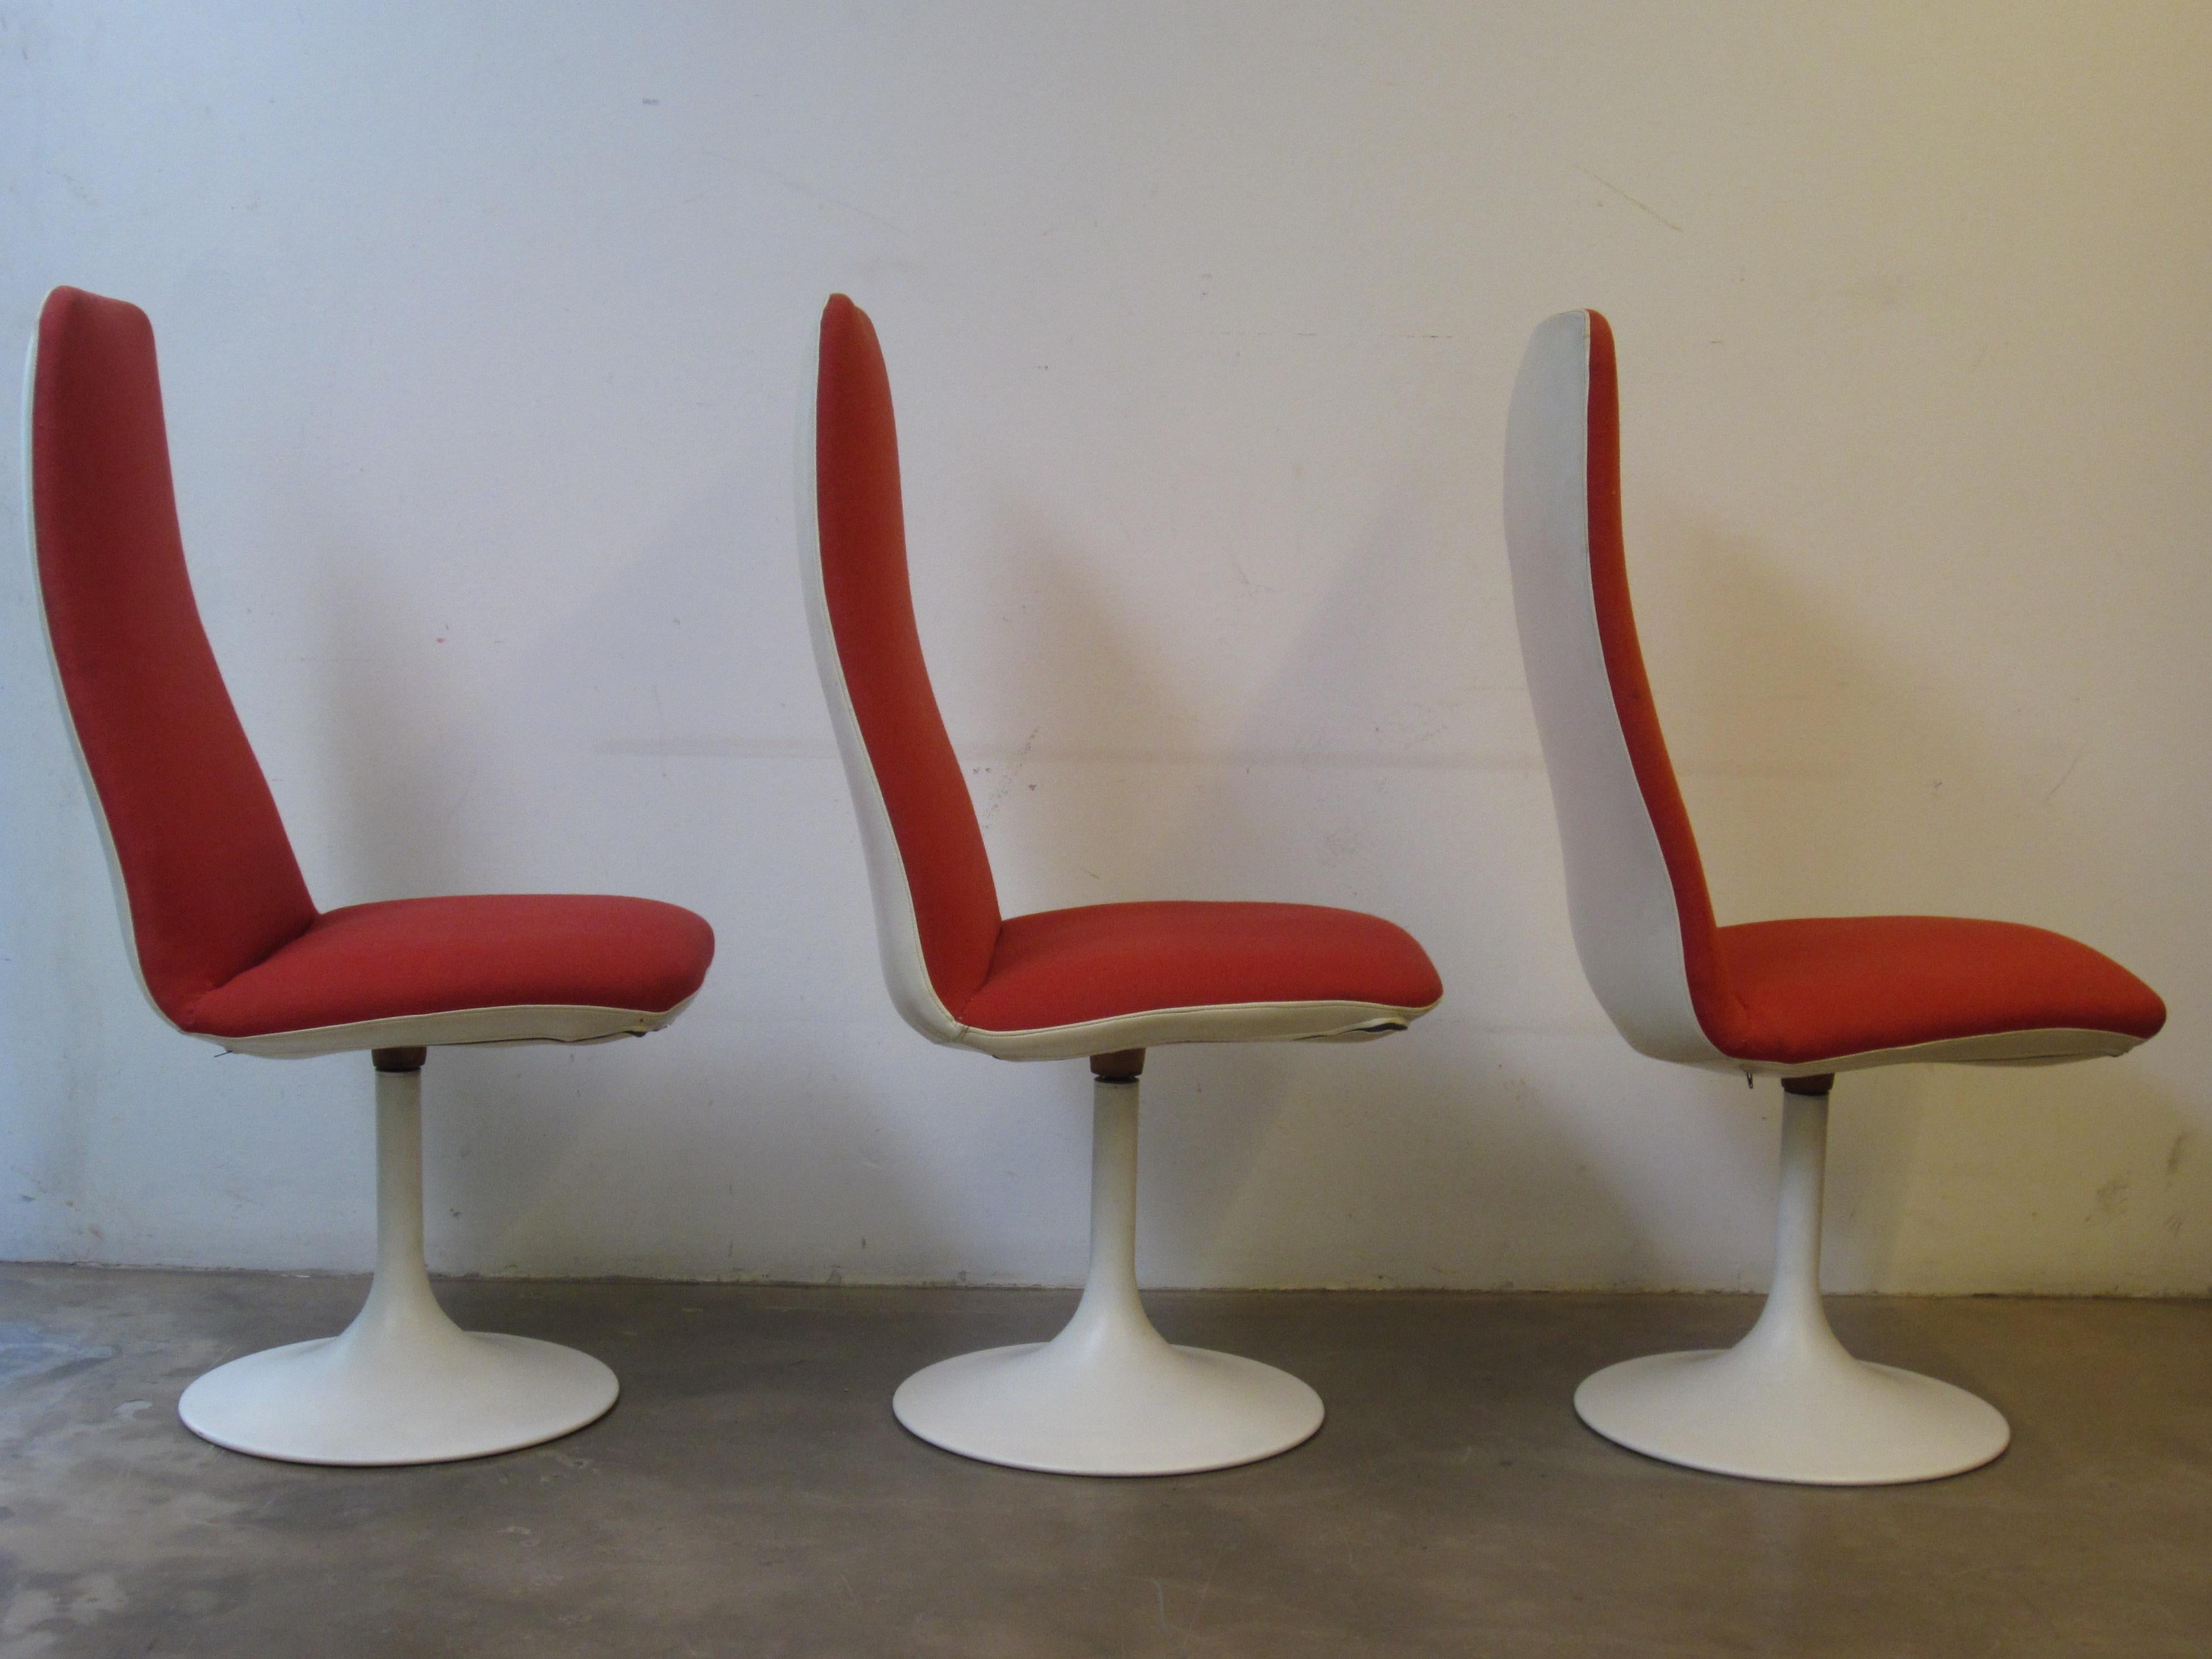 Century modern tulip base dining chairs. The fabric is original and has some wear.